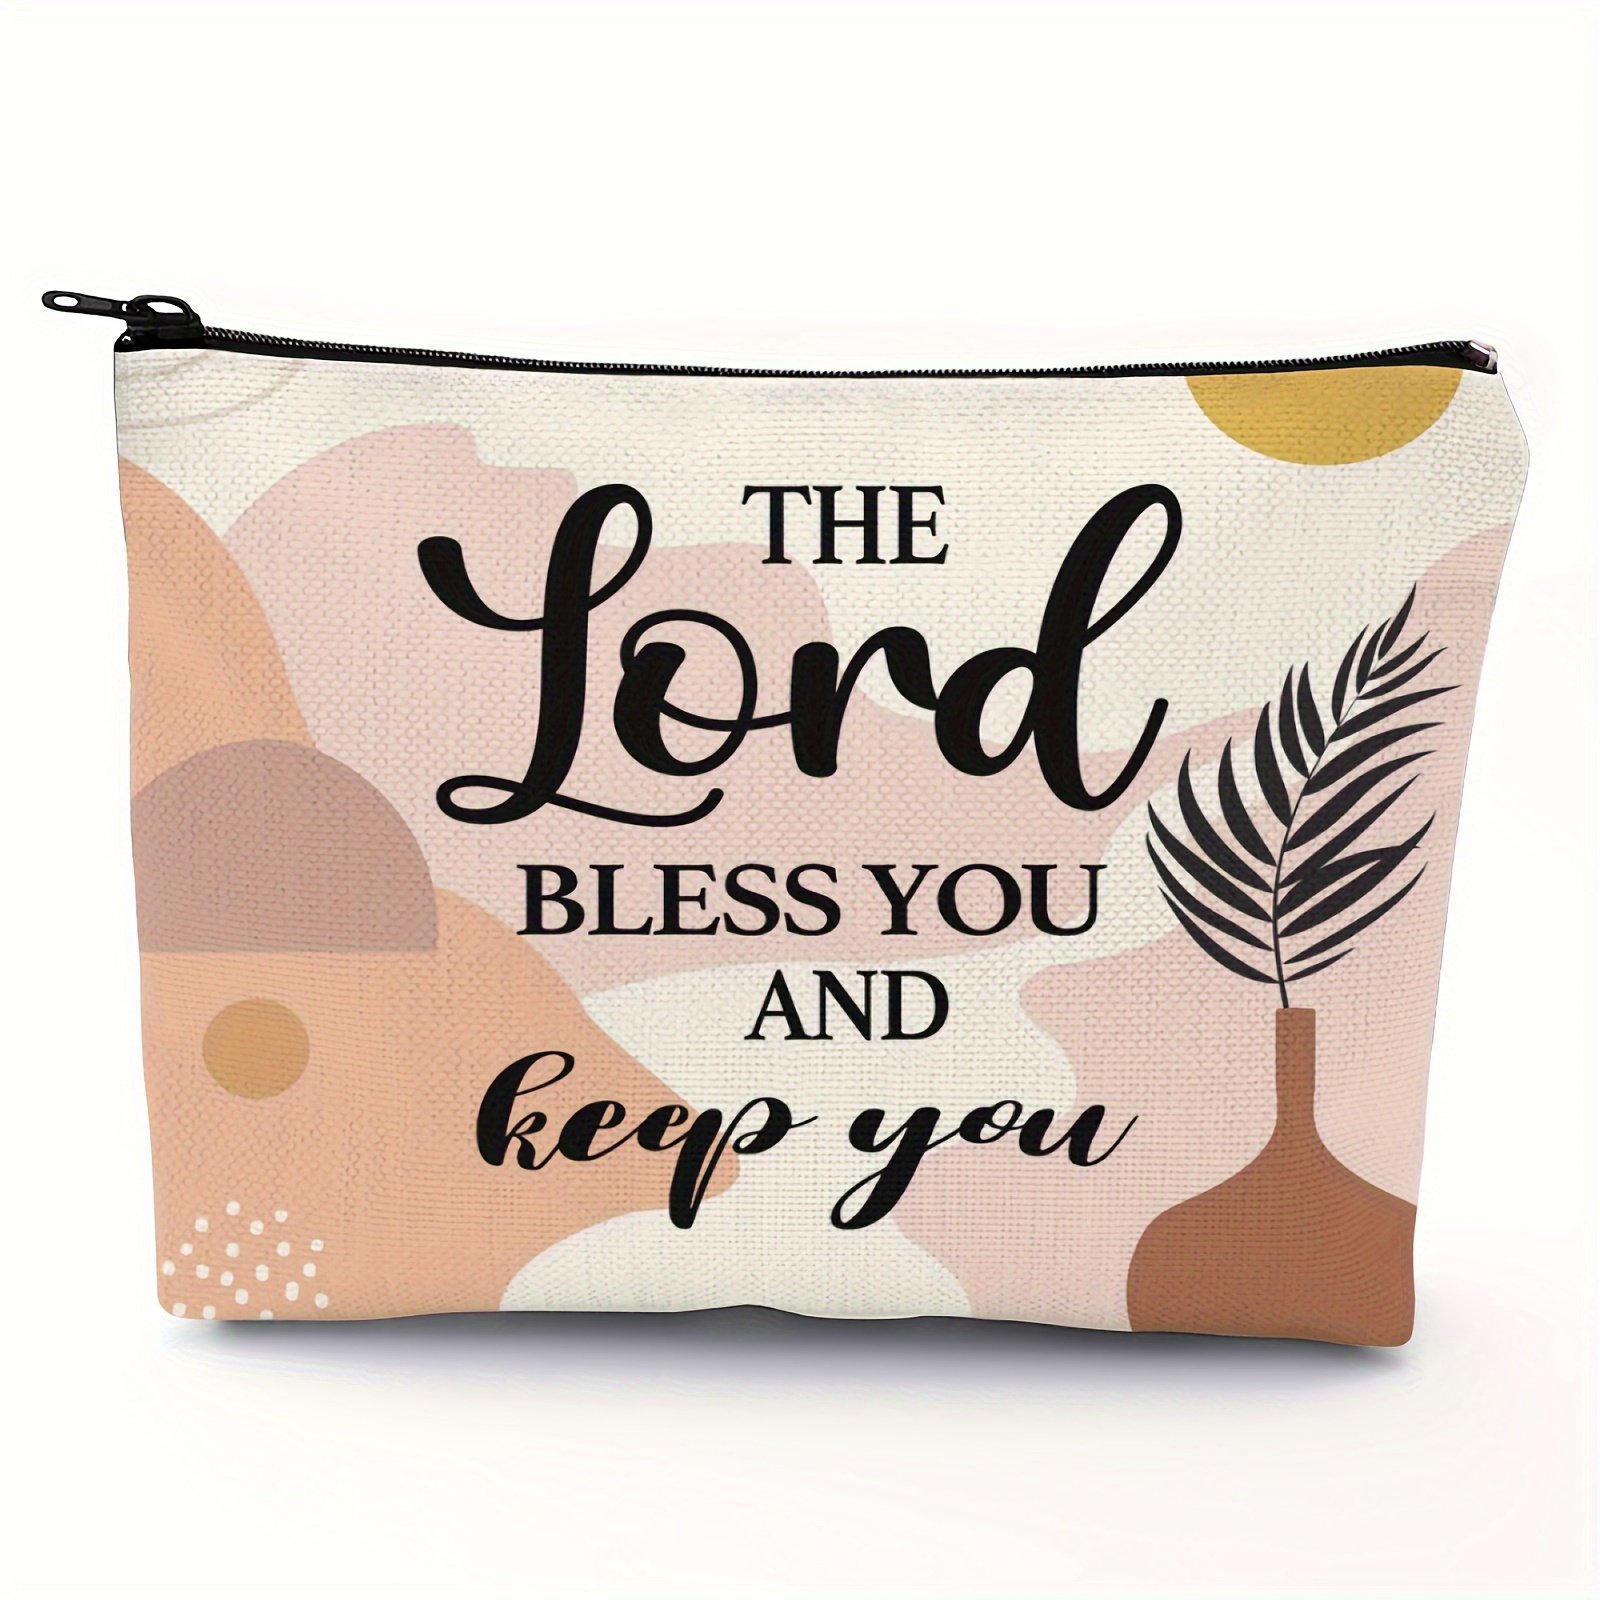  Paterr 20 Pcs Bible Verse Pencil Pouch Bulk Christian Makeup  Bag Religious Gift Inspirational Cosmetic Bag Christian Flower Pattern  Zippered Toiletry Bag Organizer Christmas Gift for Friend Women : Office  Products